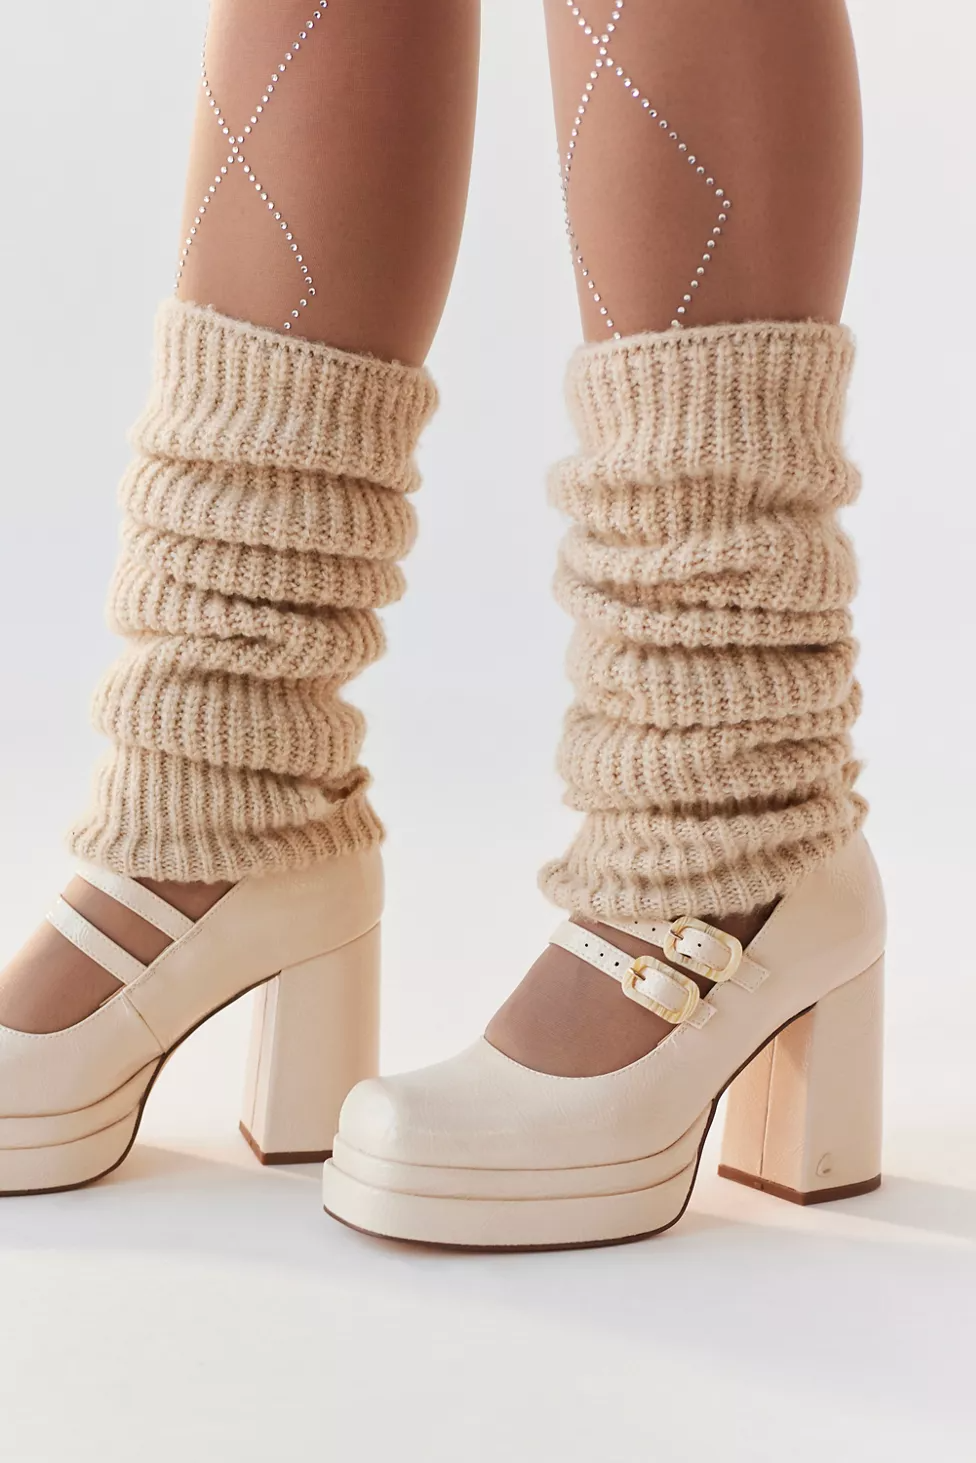 17 Mary-Jane Shoe Outfit Ideas for Every Season